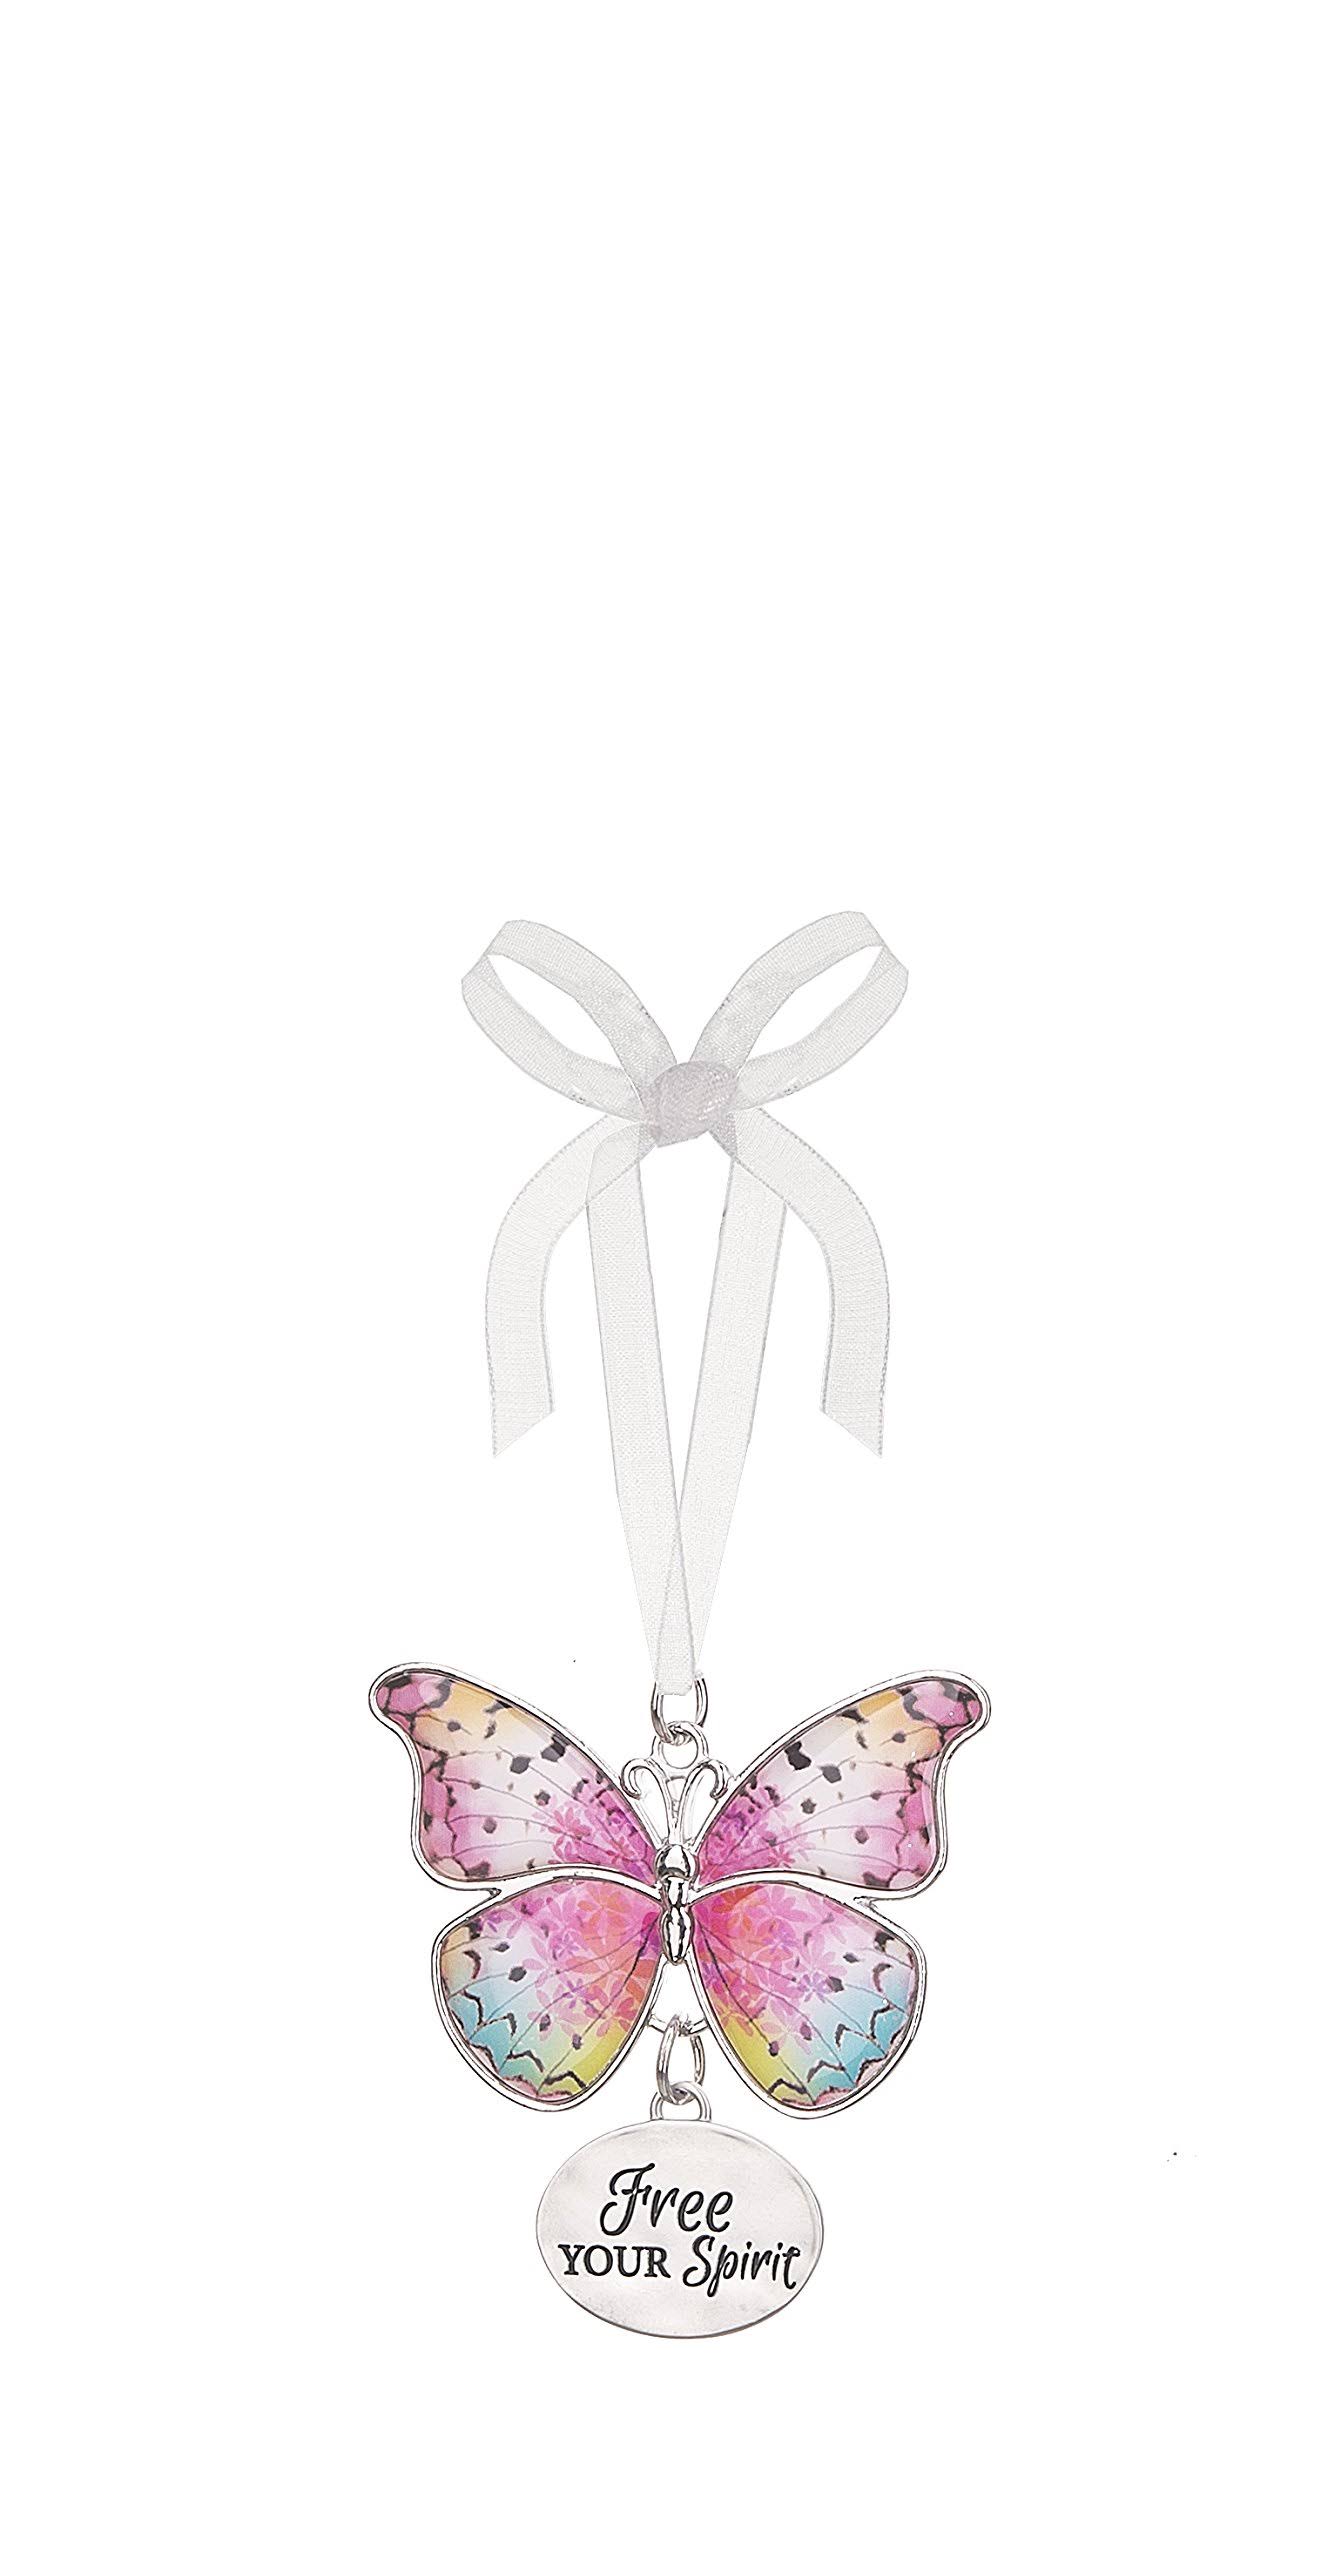 Ganz E7 Home Decor Christmas Spring Blissful Journey Butterfly Ornament - Your Spirit